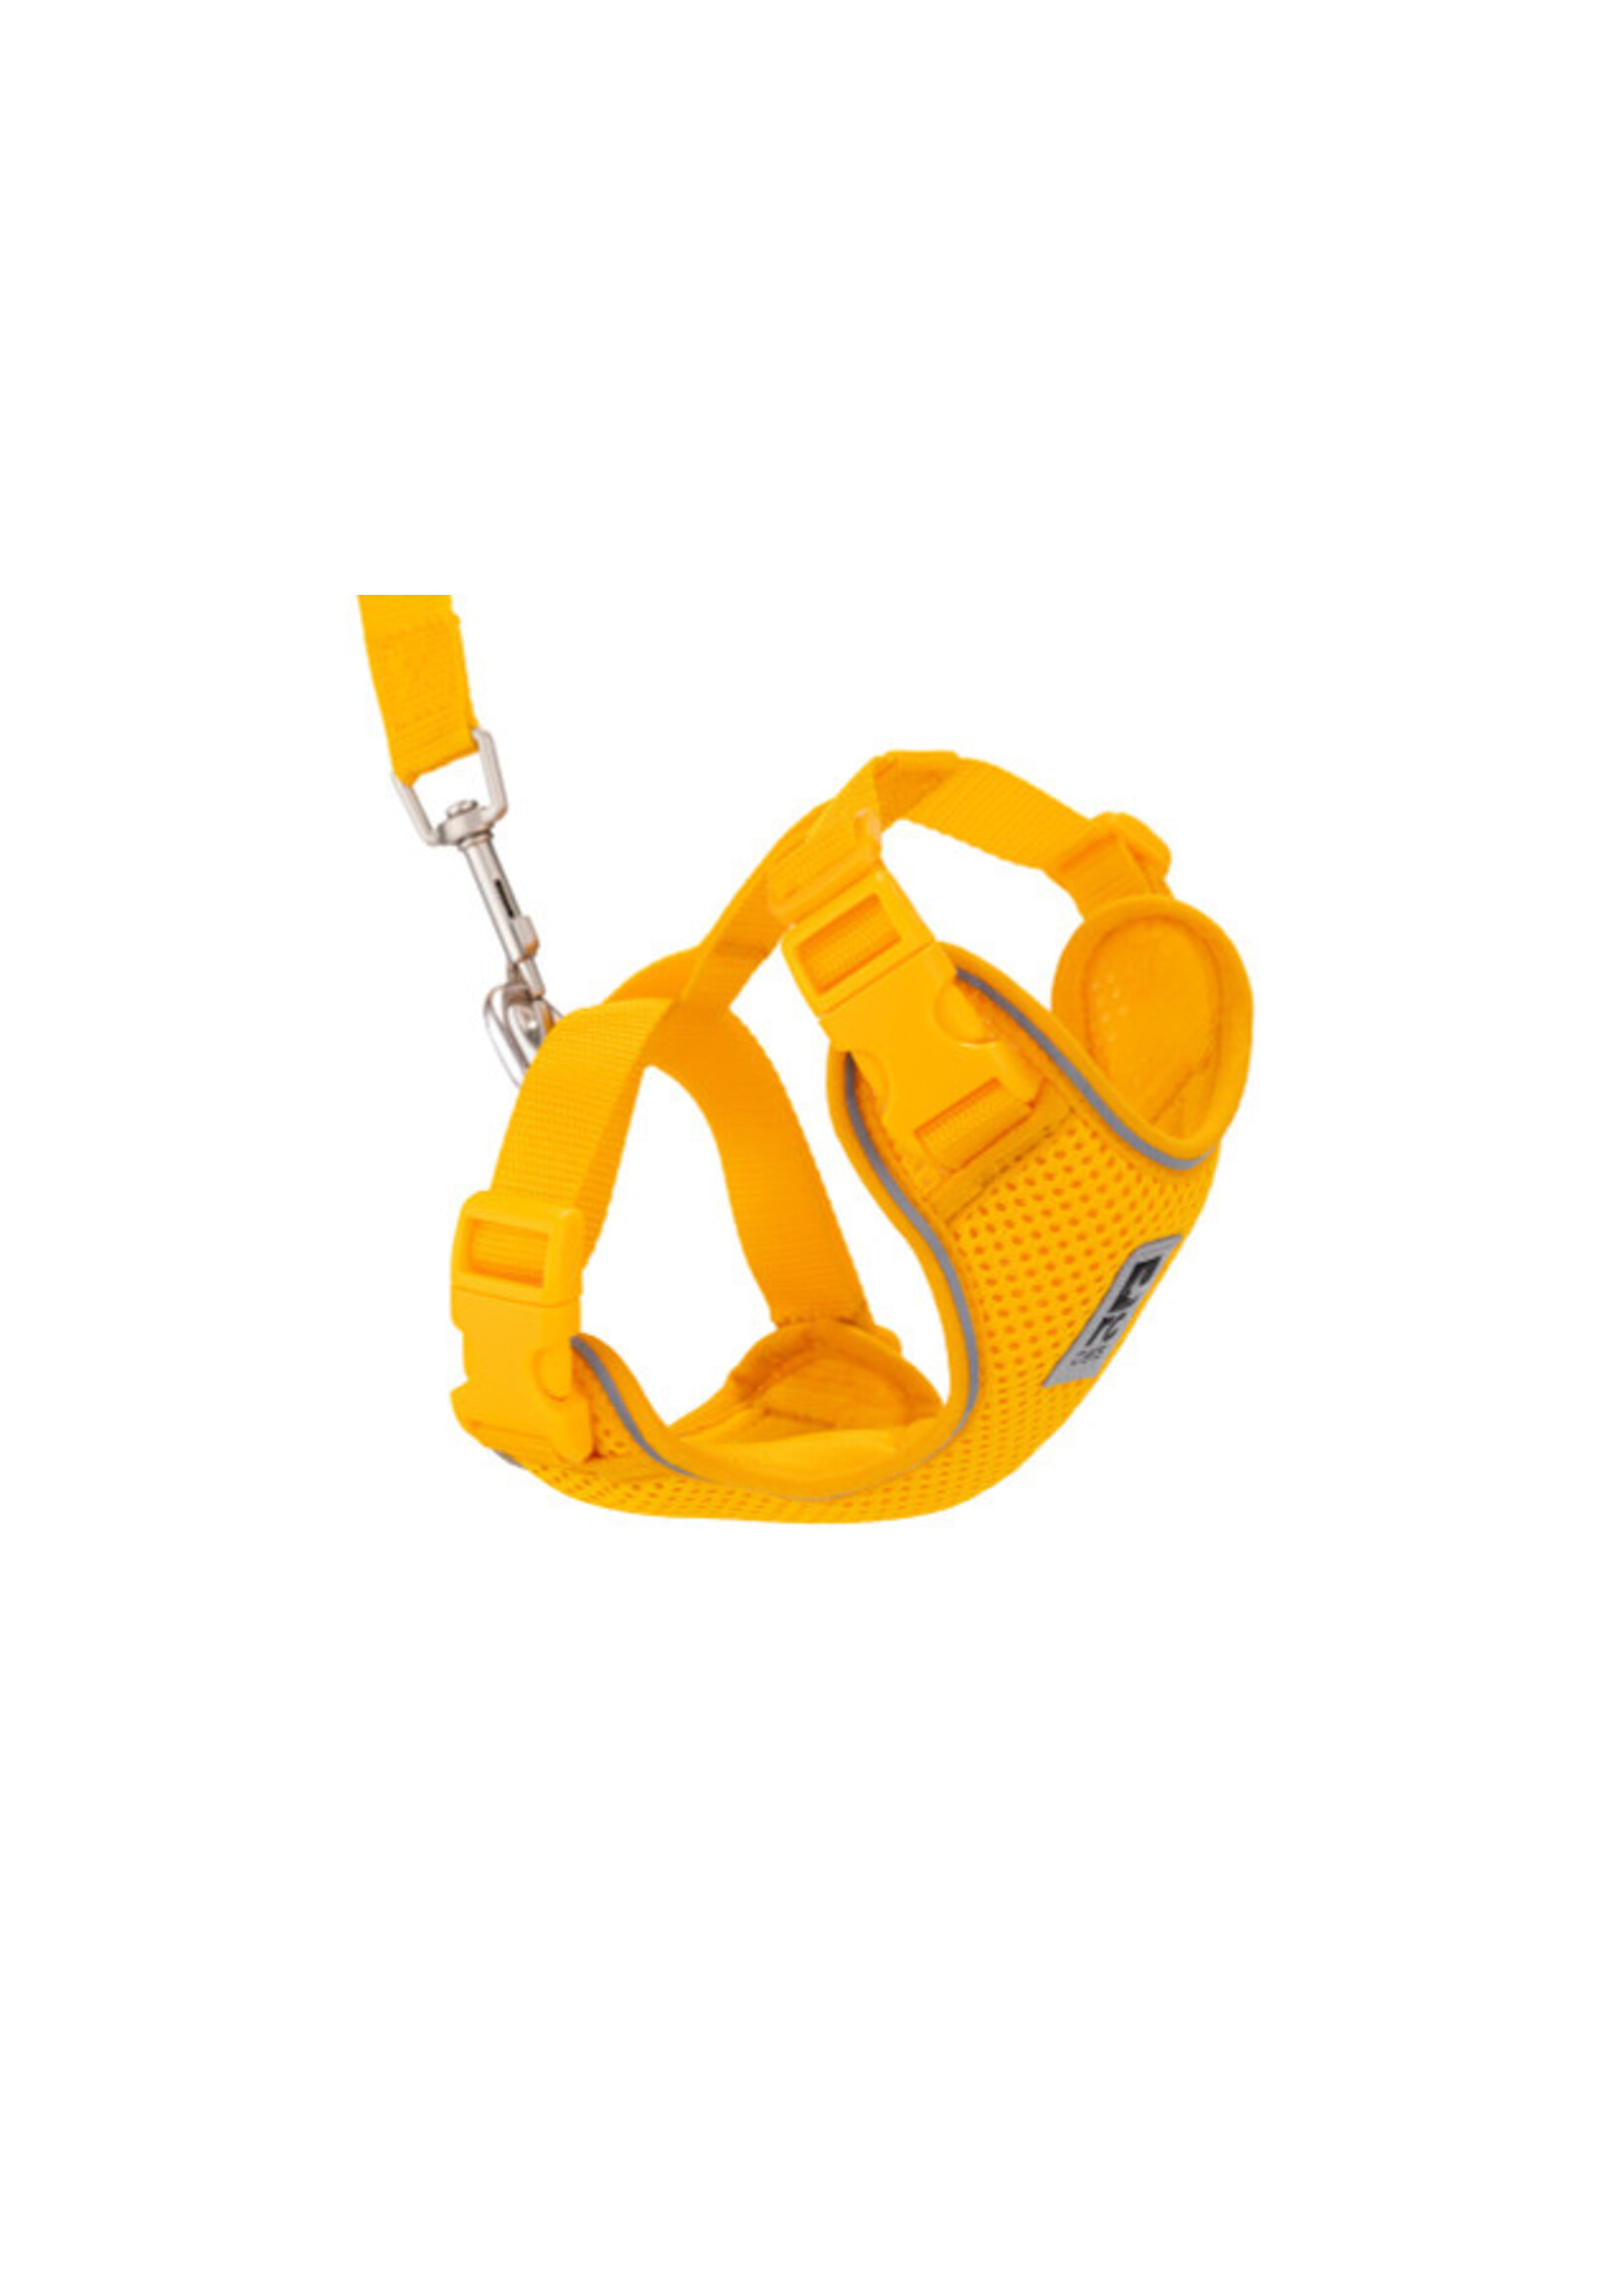 RC Pet Products RC Adventure Kitty Harness